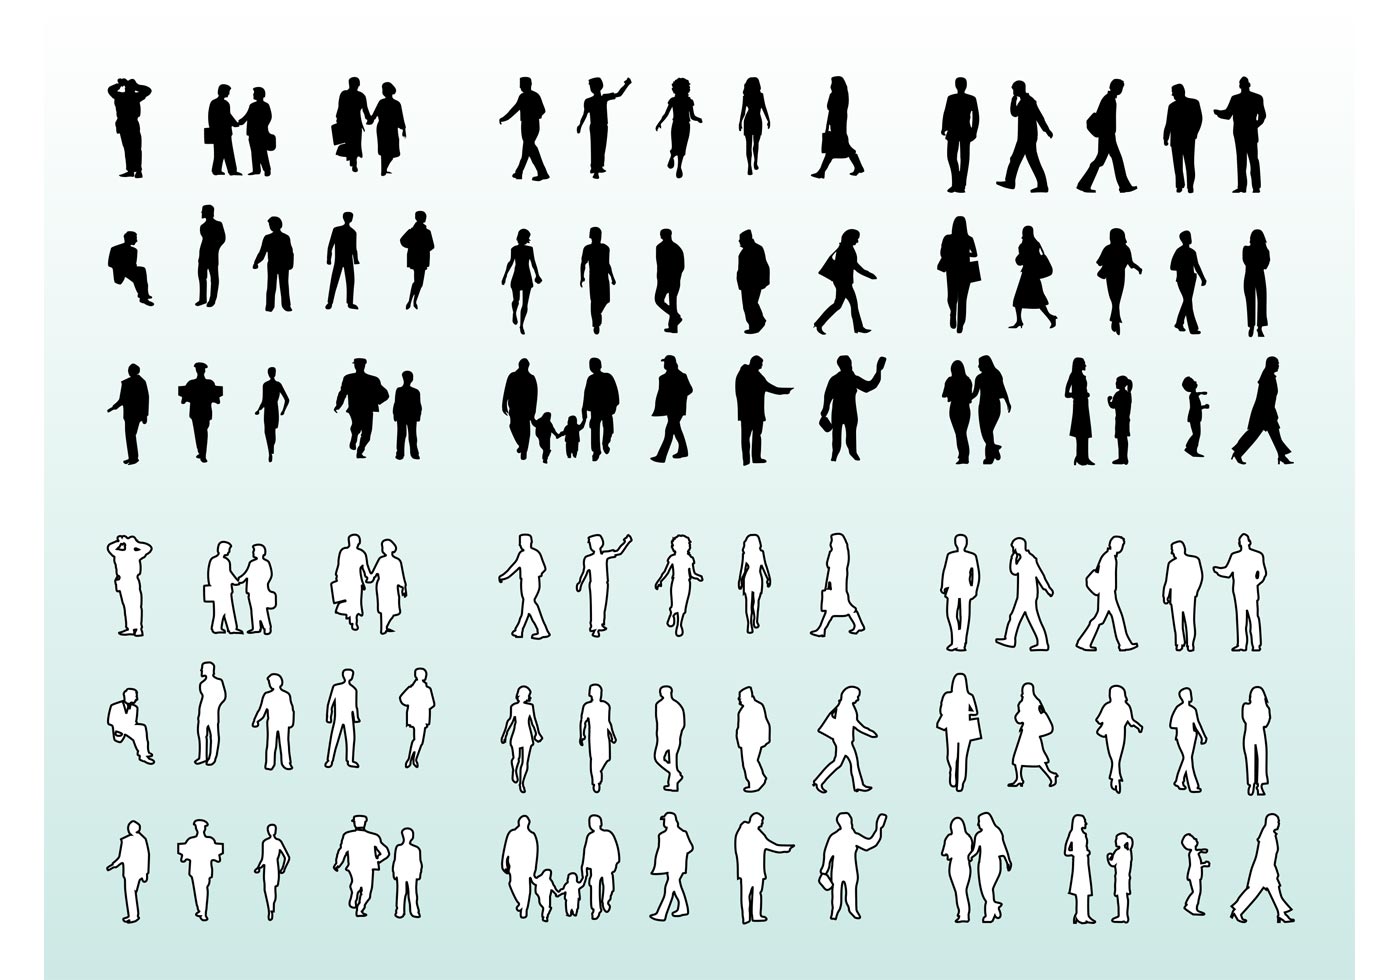 Download People Silhouettes and Outlines - Download Free Vector Art, Stock Graphics & Images